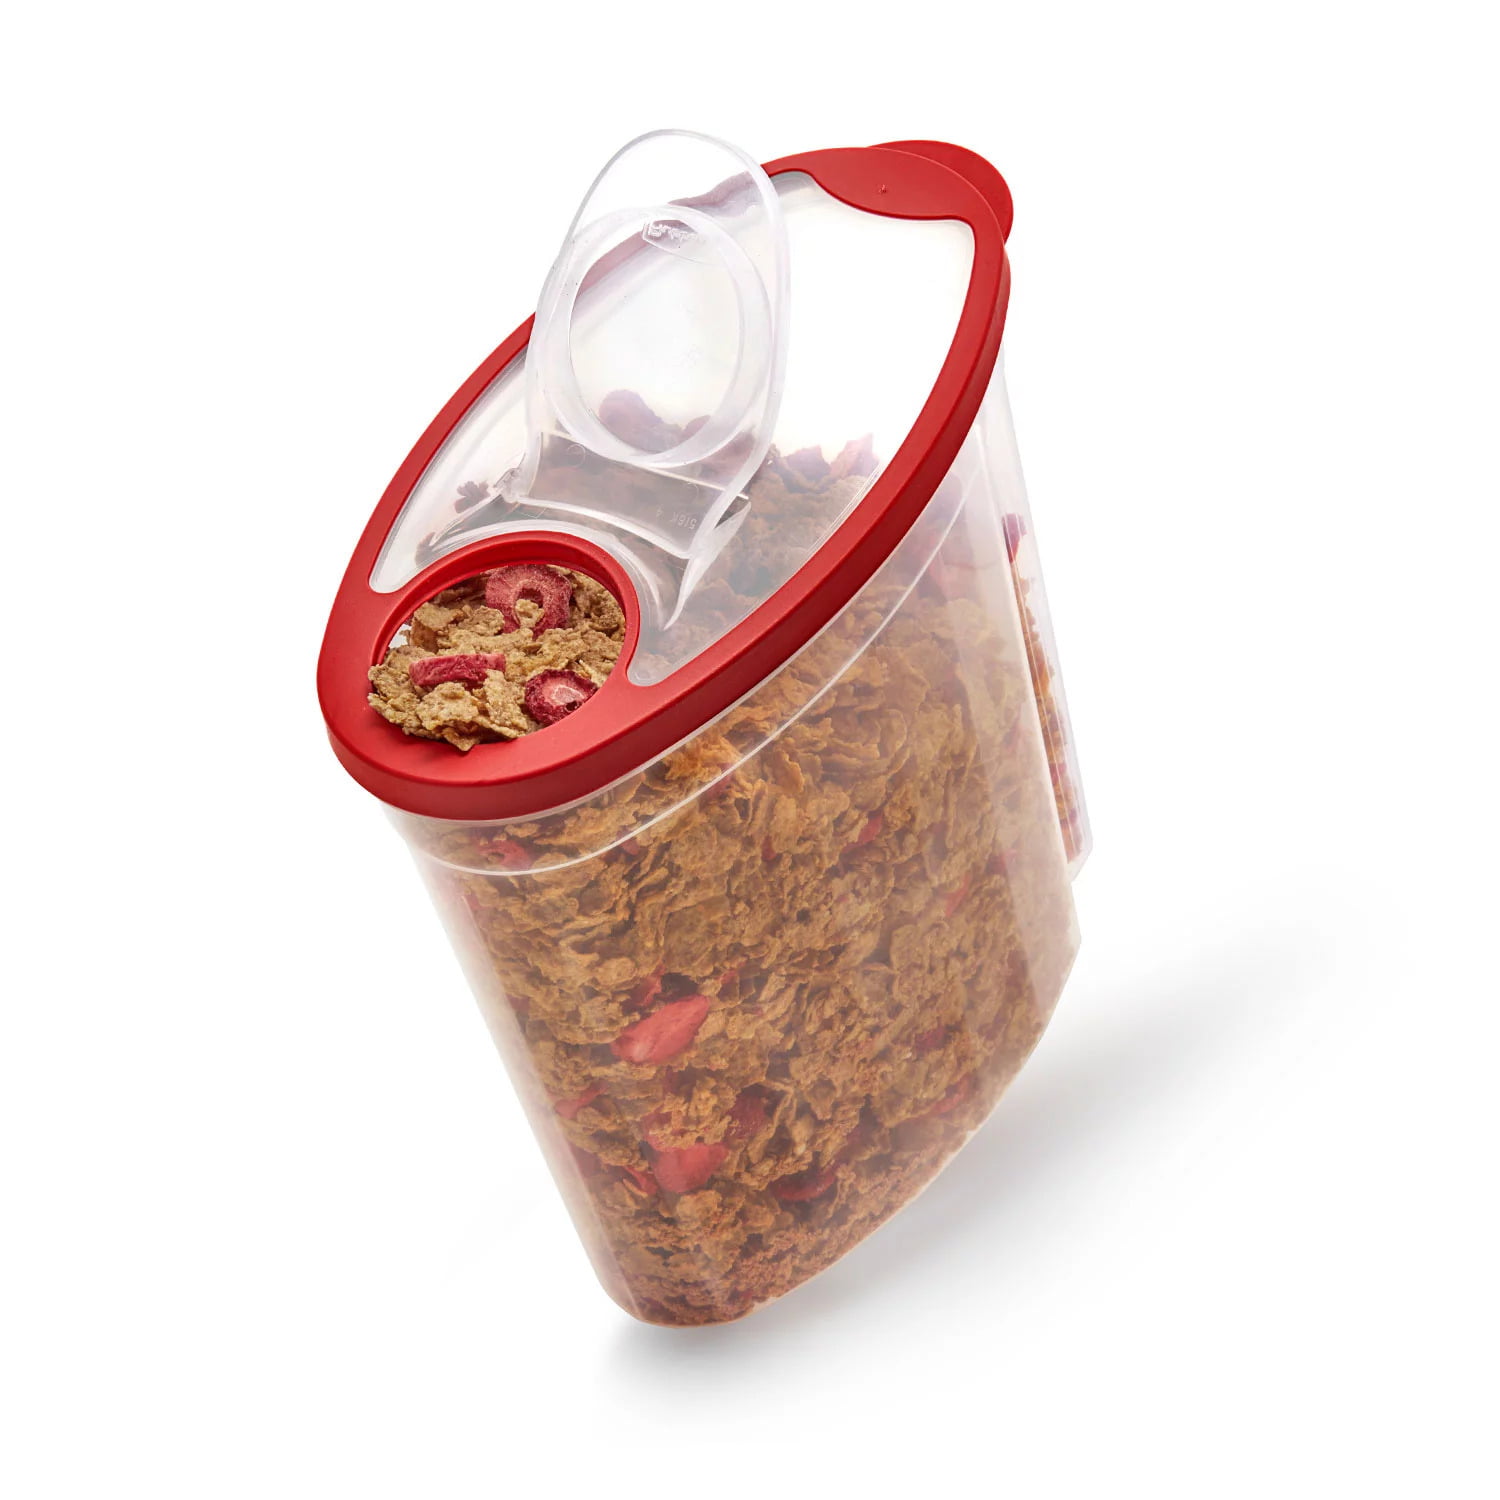 Rubbermaid Cereal Keeper Containers, Three 22.8 Cup Cereal Keeper Food